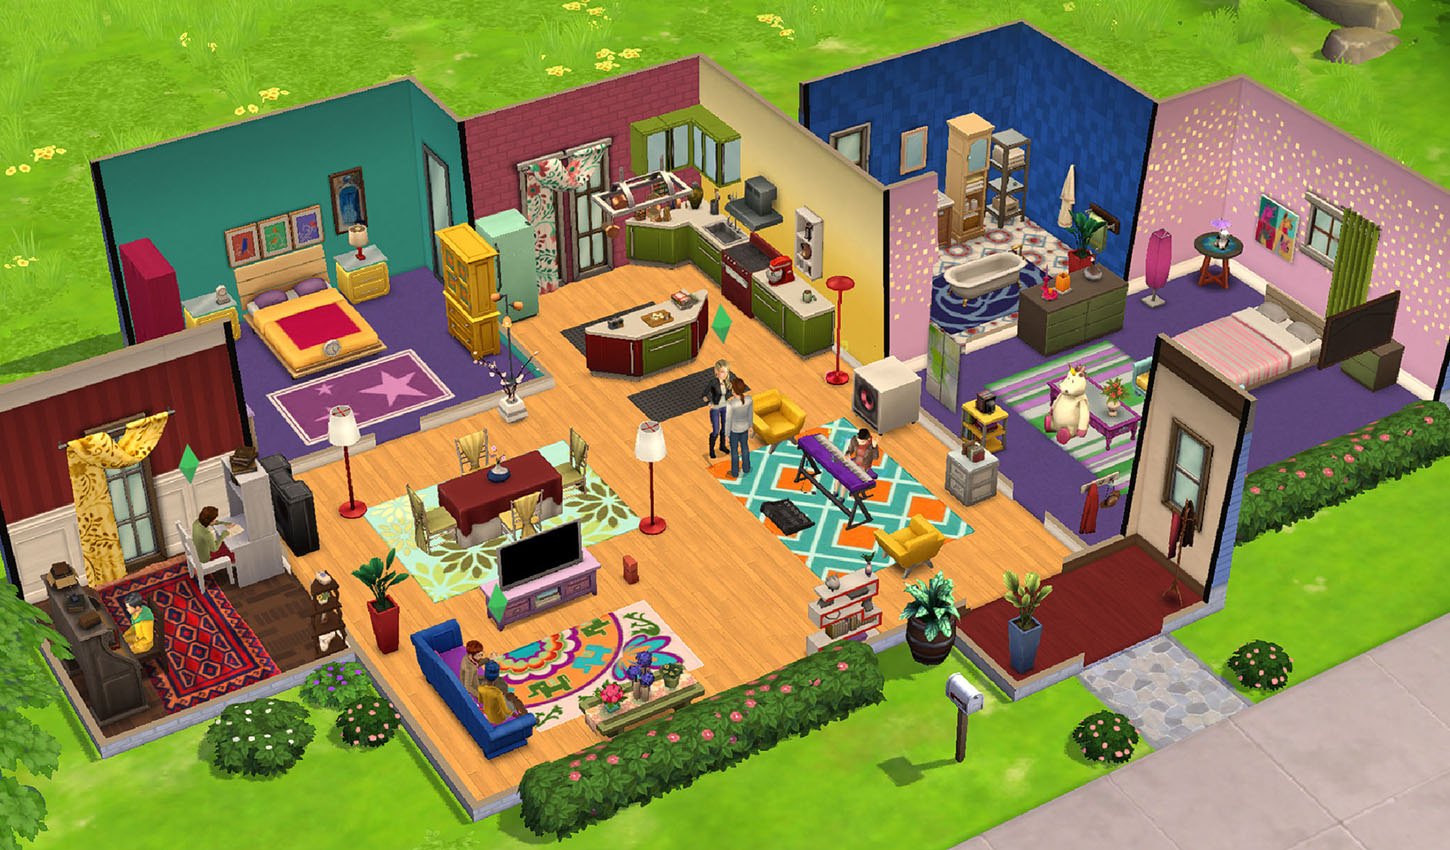 The Sims - Learn to Download and Play on Mobile